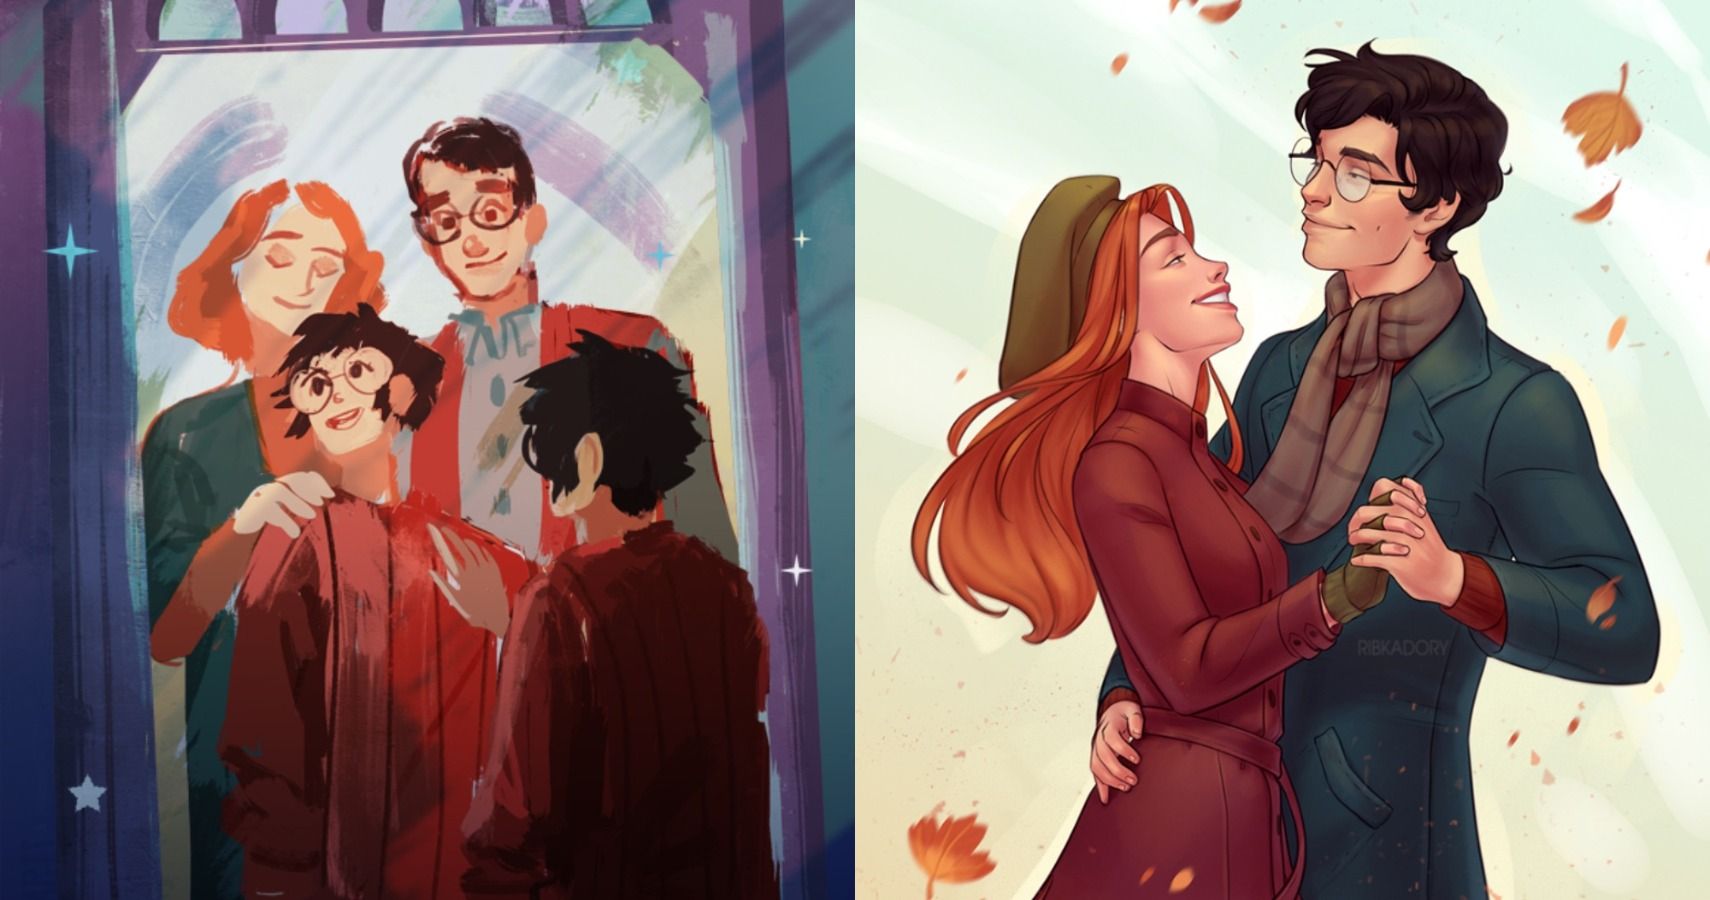 Harry Potter: 10 Fan Art Pictures Of Lily & James Potter That Fans Will...